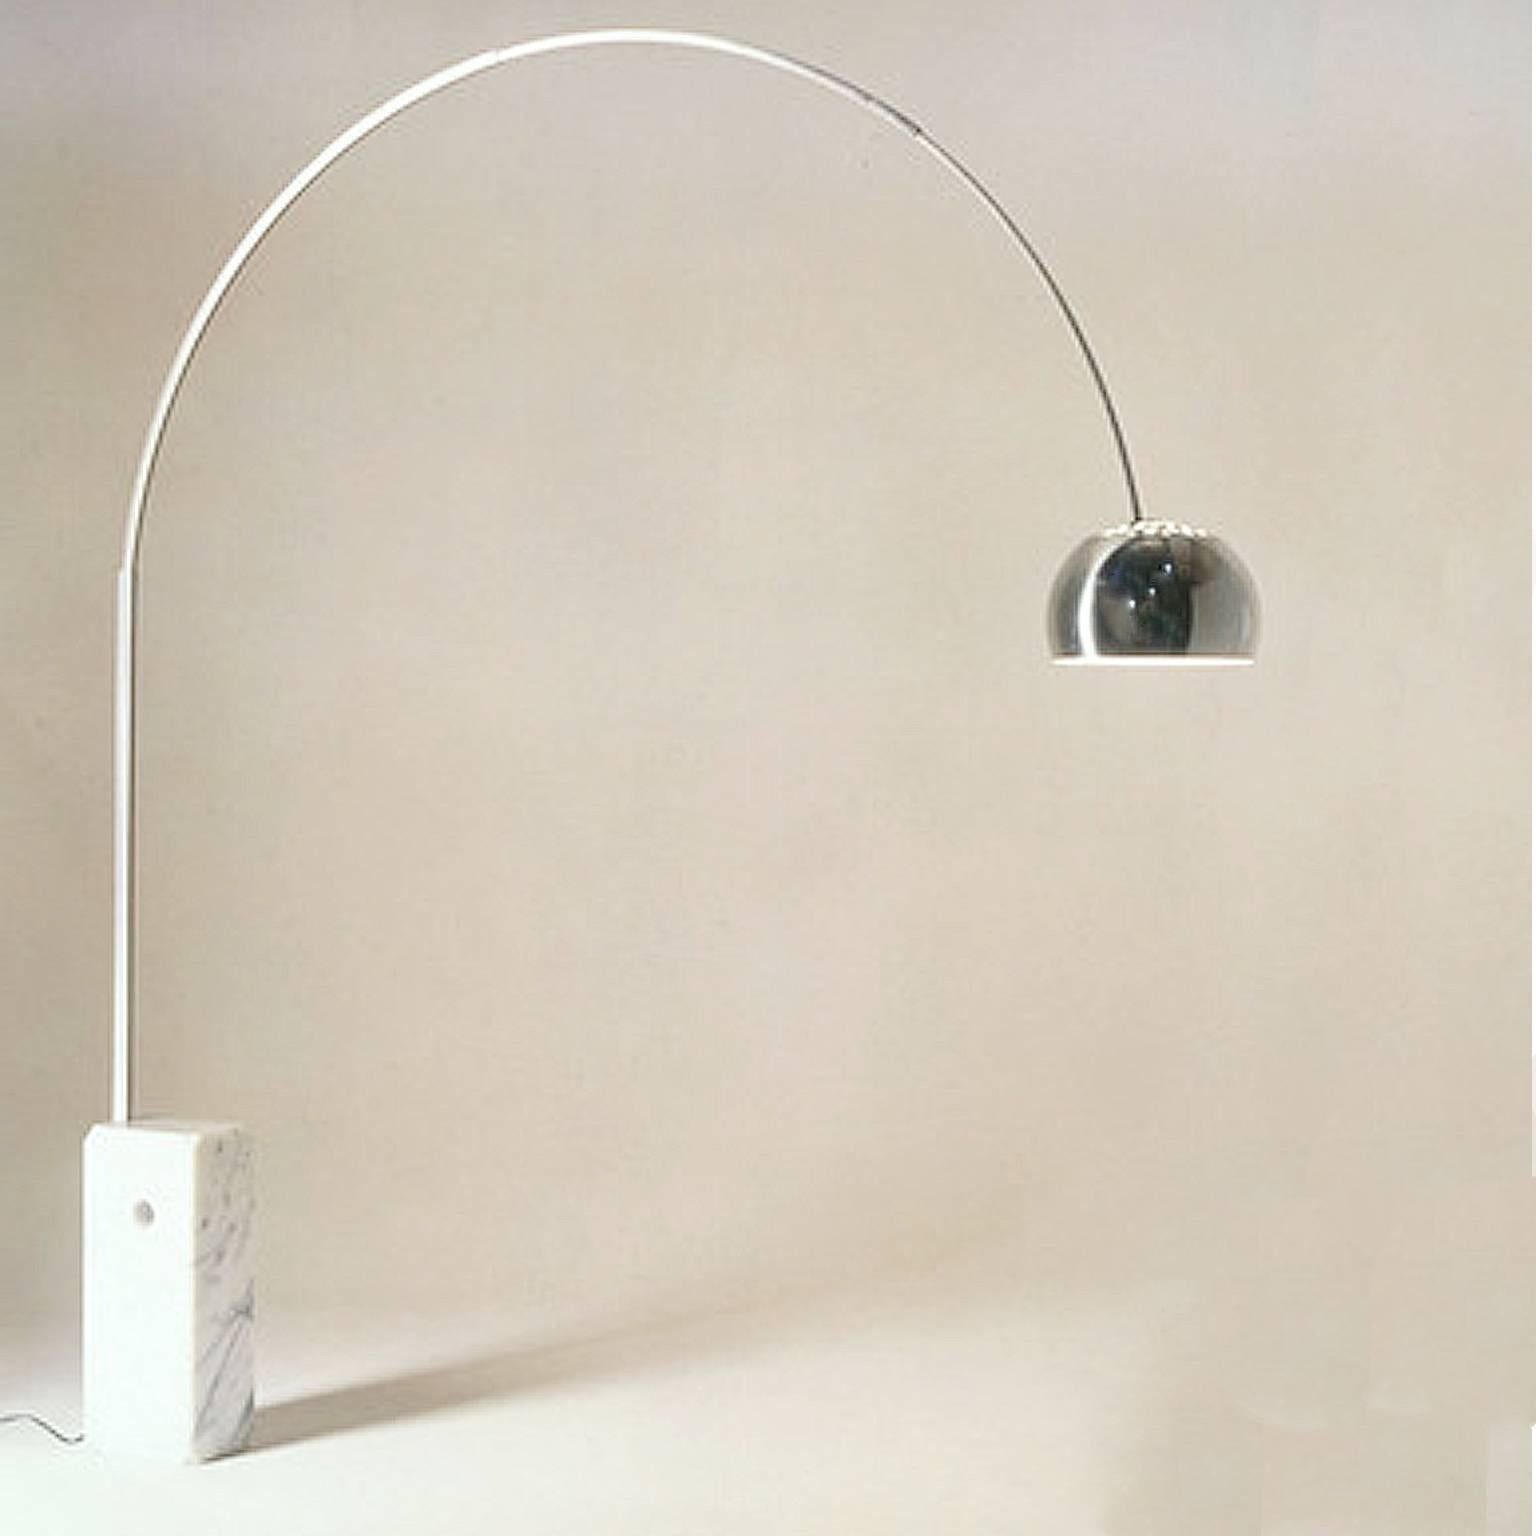 Designed in 1962, an original iconic Arco lamp. Ideal over sofas or dining tables. Made in Italy by Flos. Original label intact. Floor switch has been replaced by foot pedal type power control.